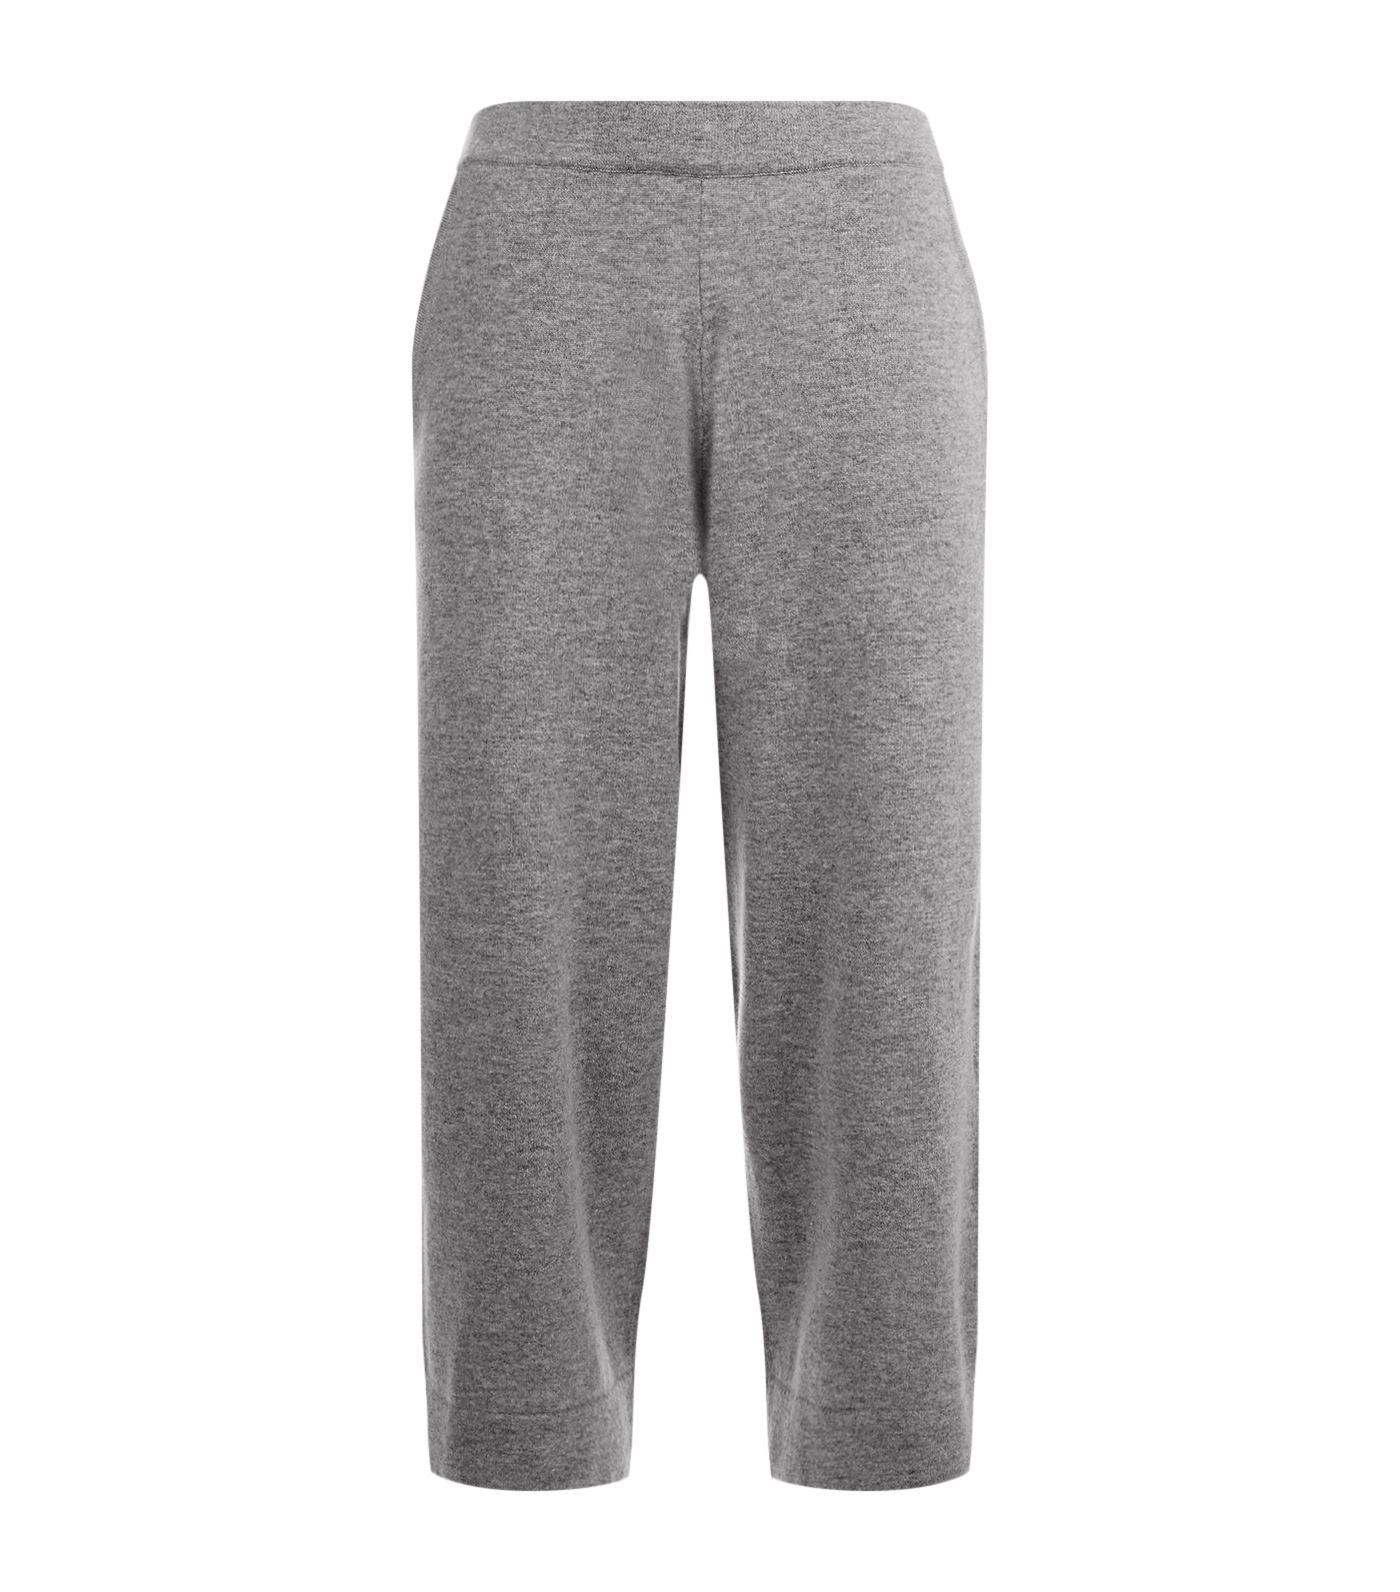 Allude Cashmere And Wool Culottes in Grey (Gray) - Lyst